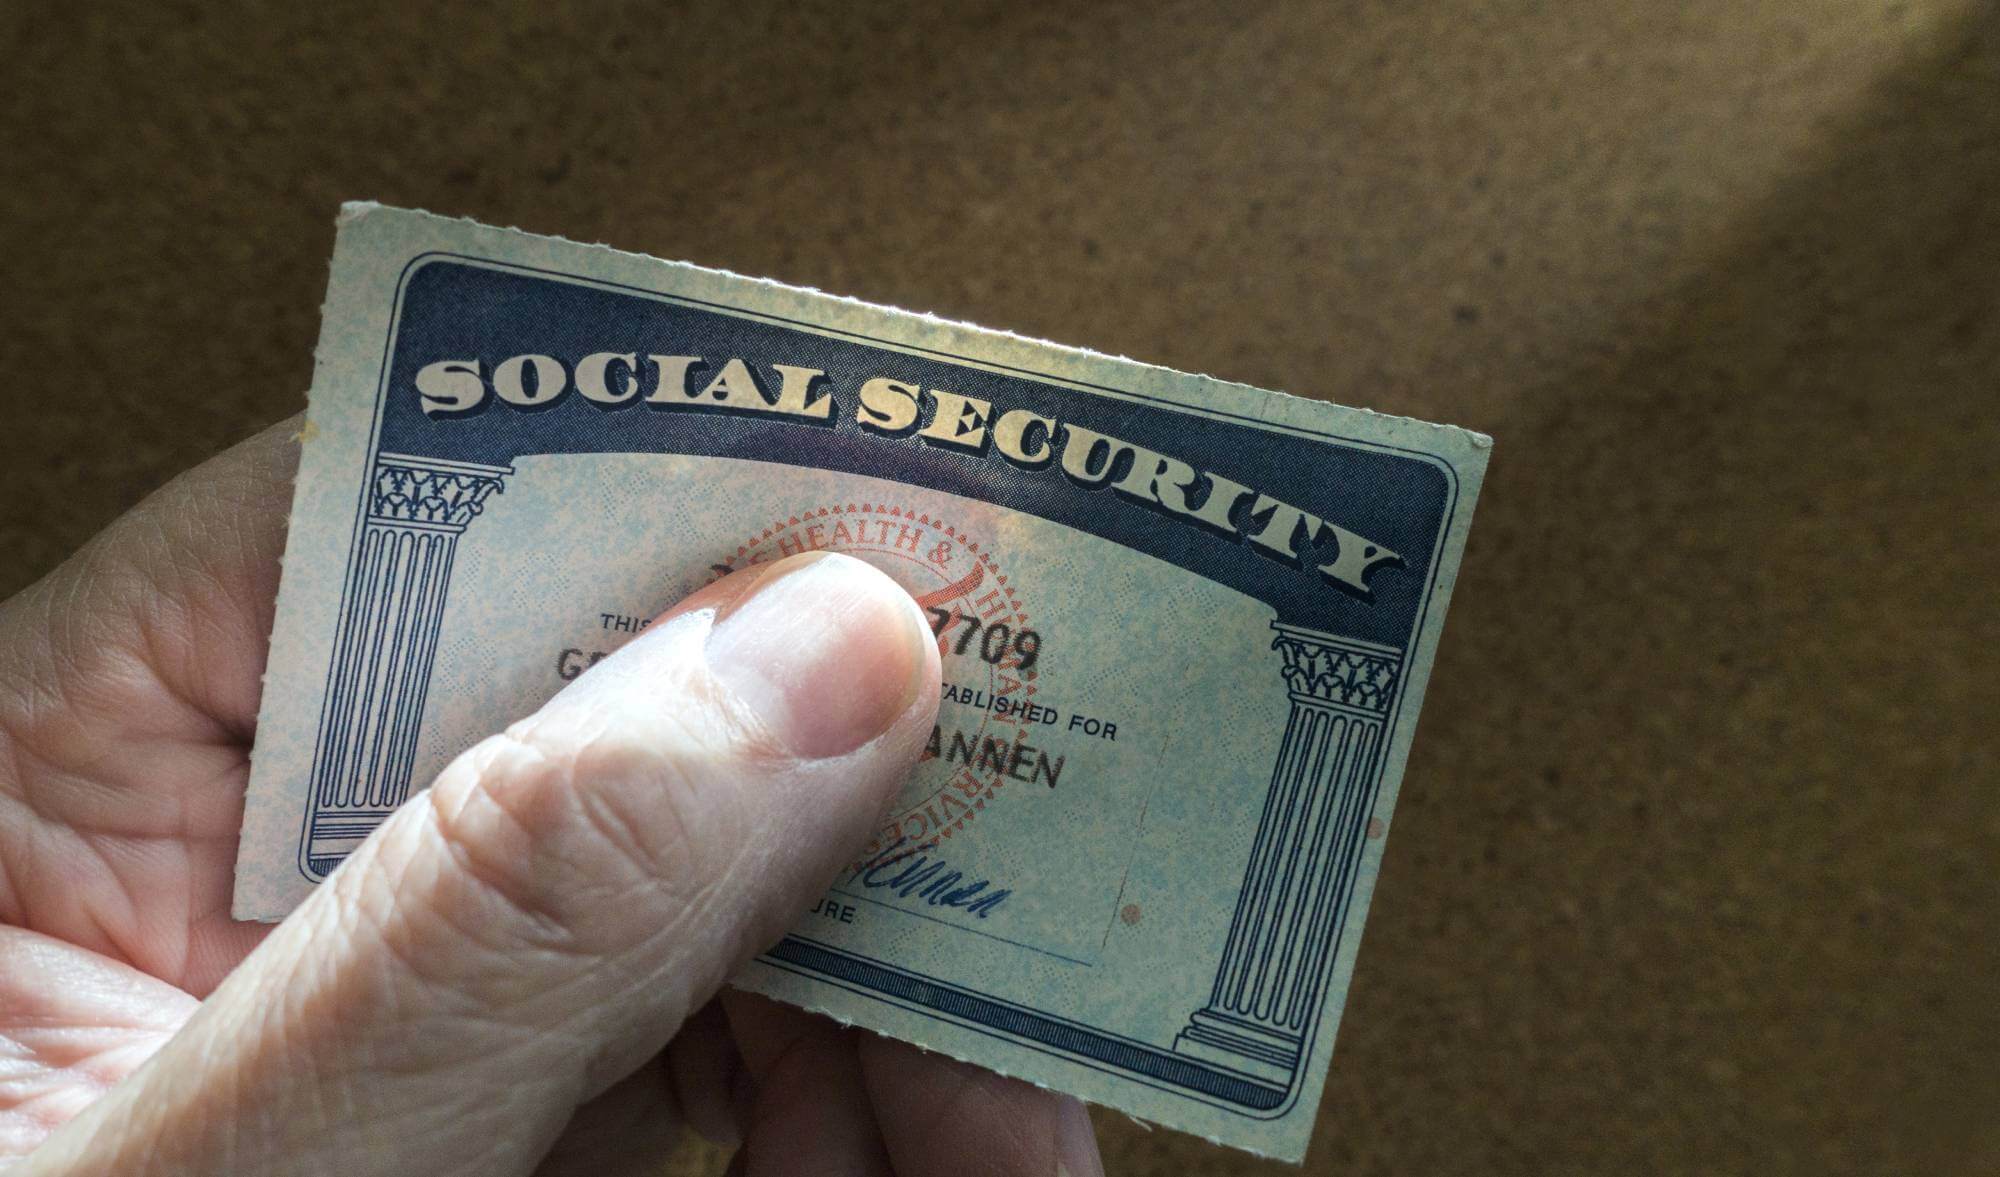 How to Defend Against Social Security Scams